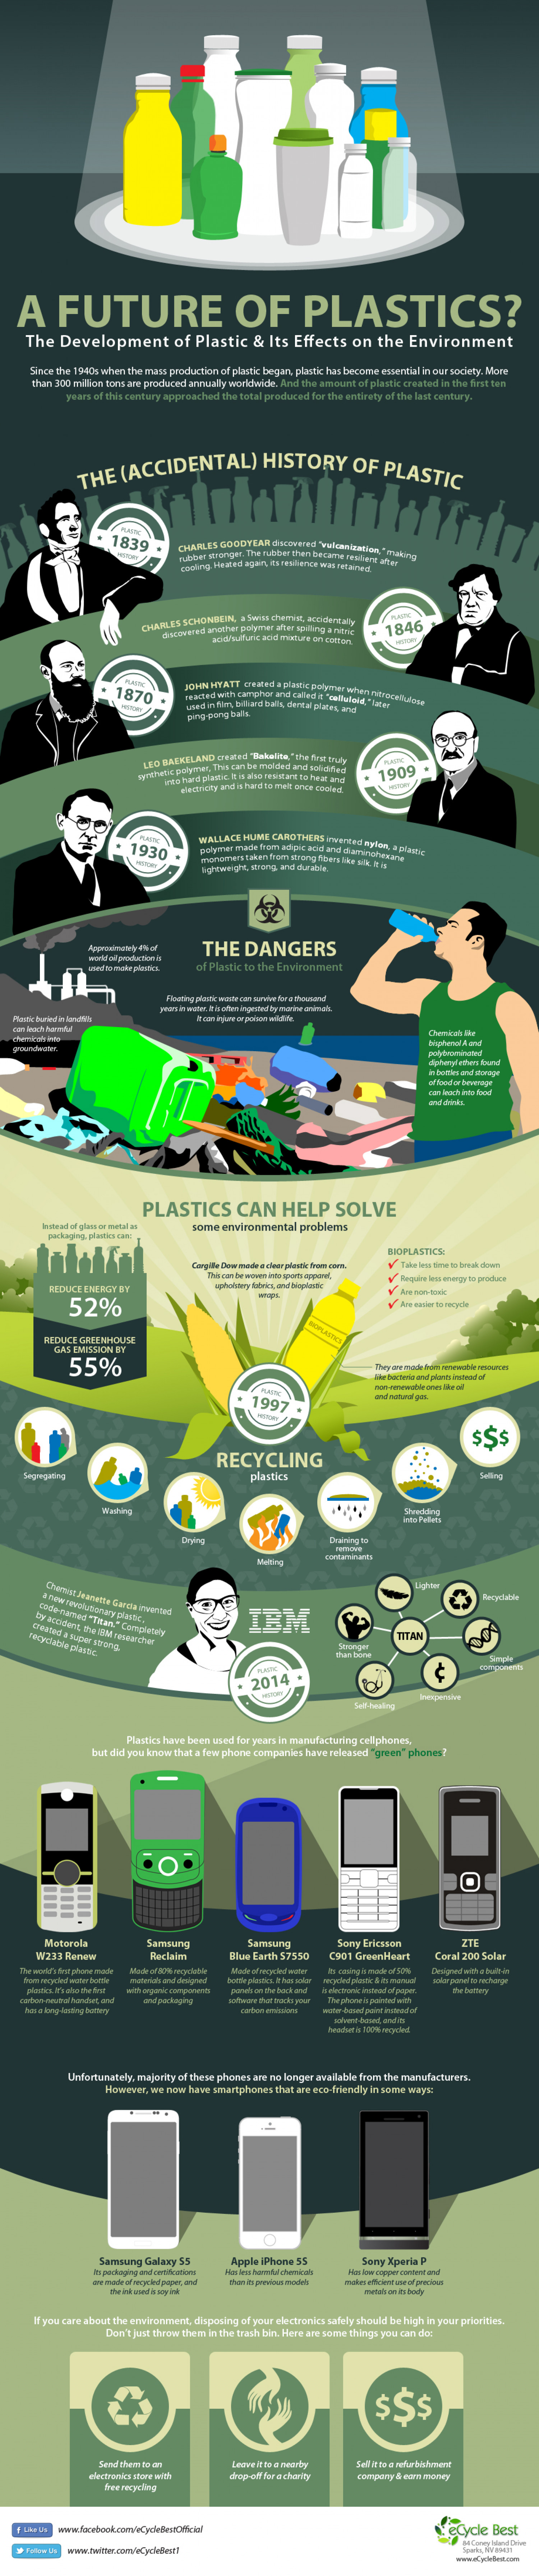 The Development of Plastic and Its Effect on the Environment Infographic